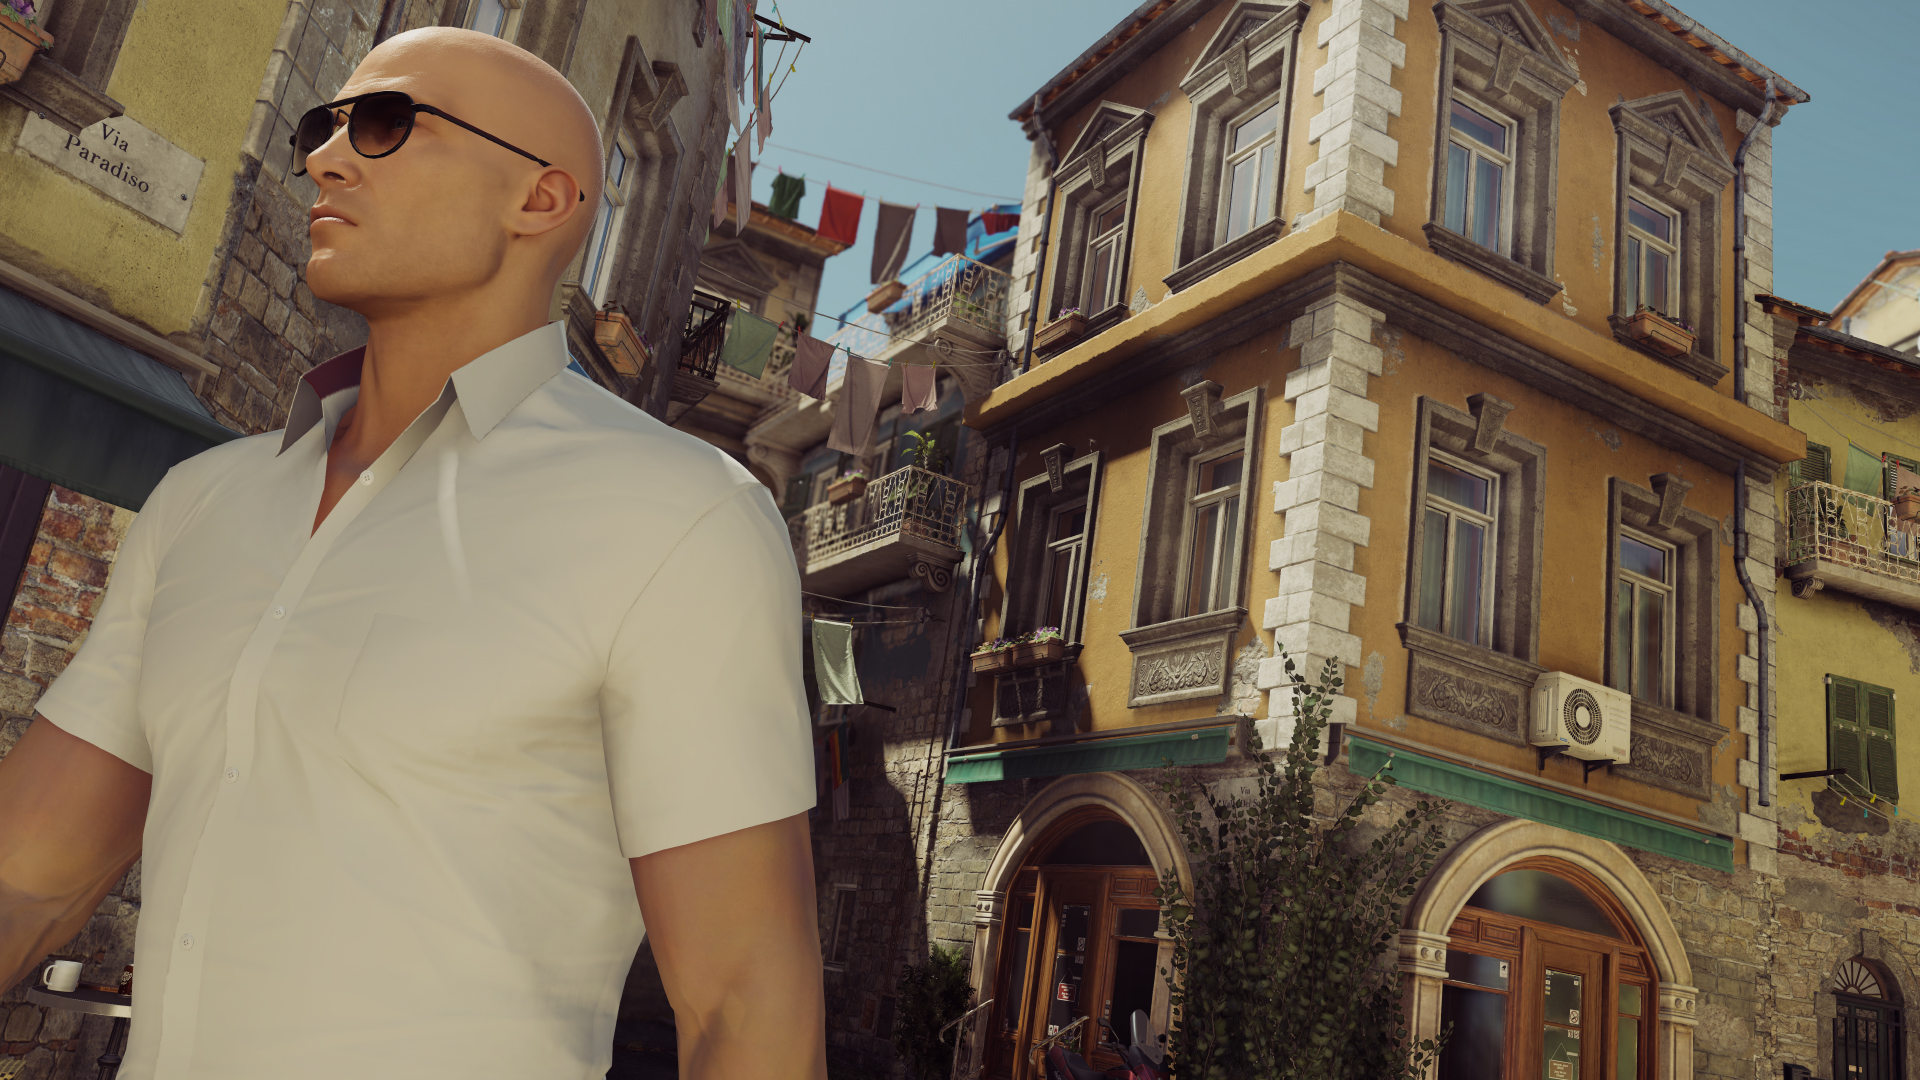 Hitman: The Complete Season review: "Vast environments with possibilities and potential" | GamesRadar+